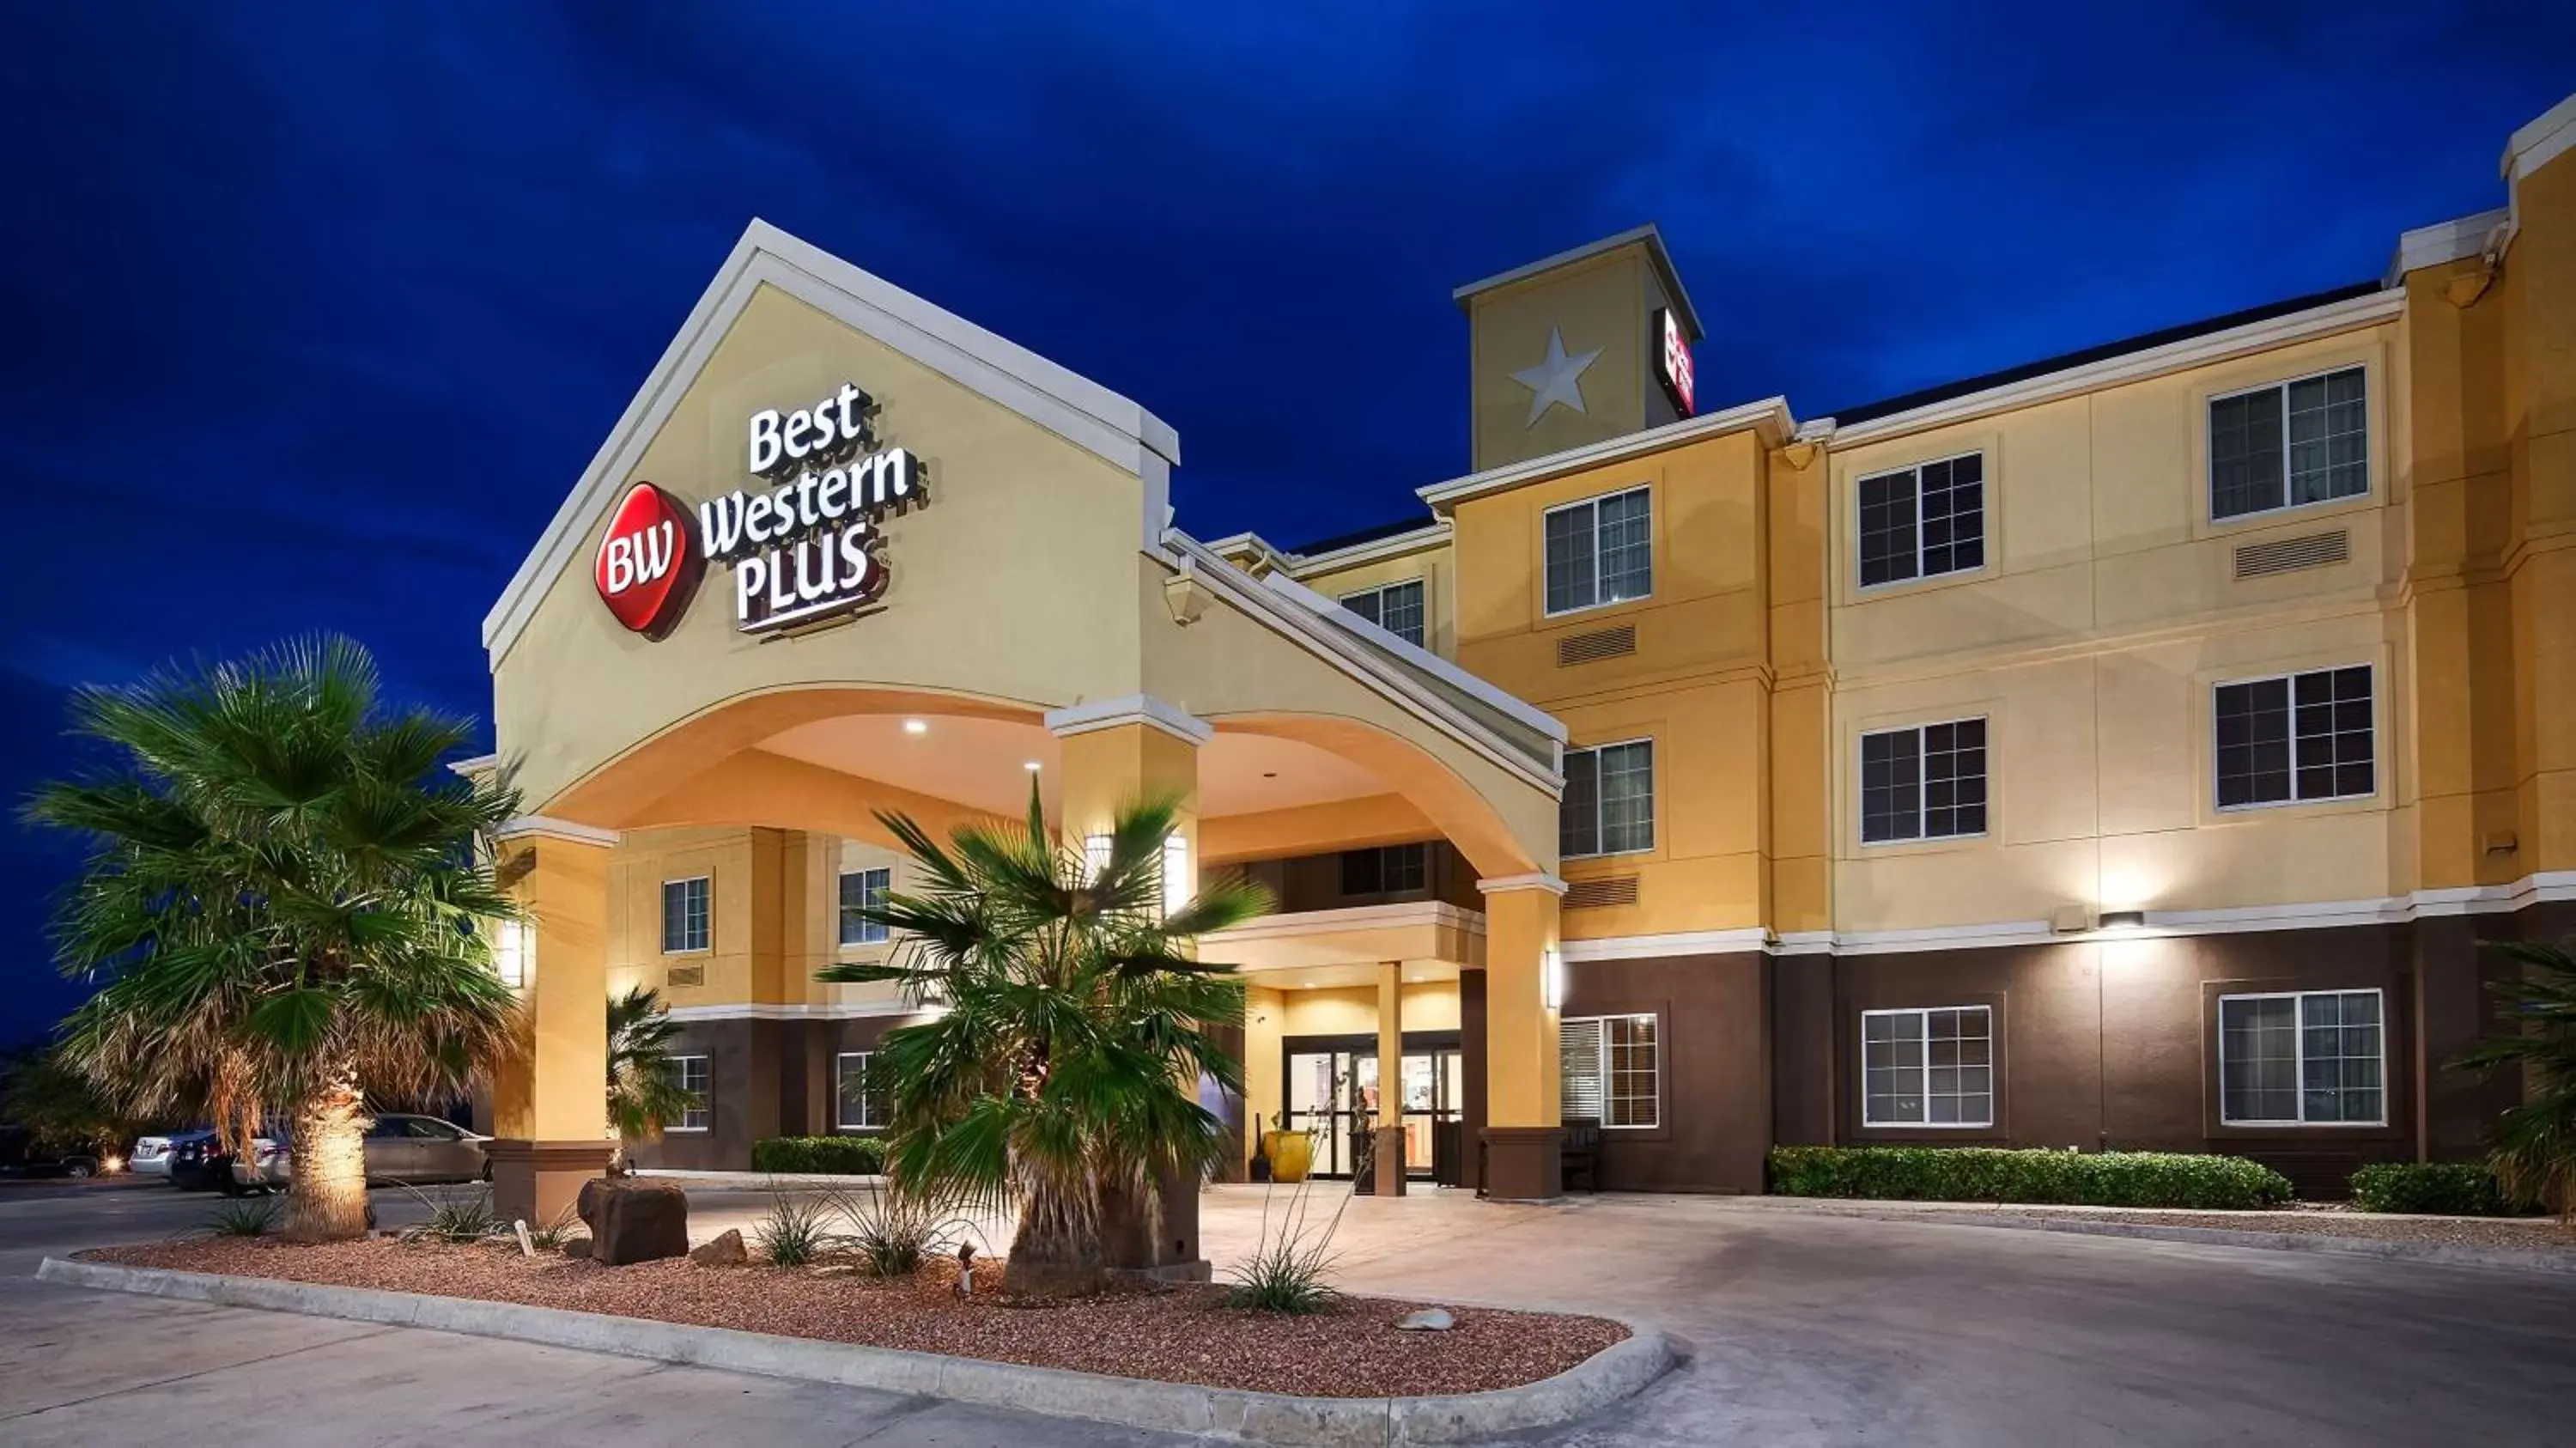 Property building in Best Western Plus Monahans Inn and Suites